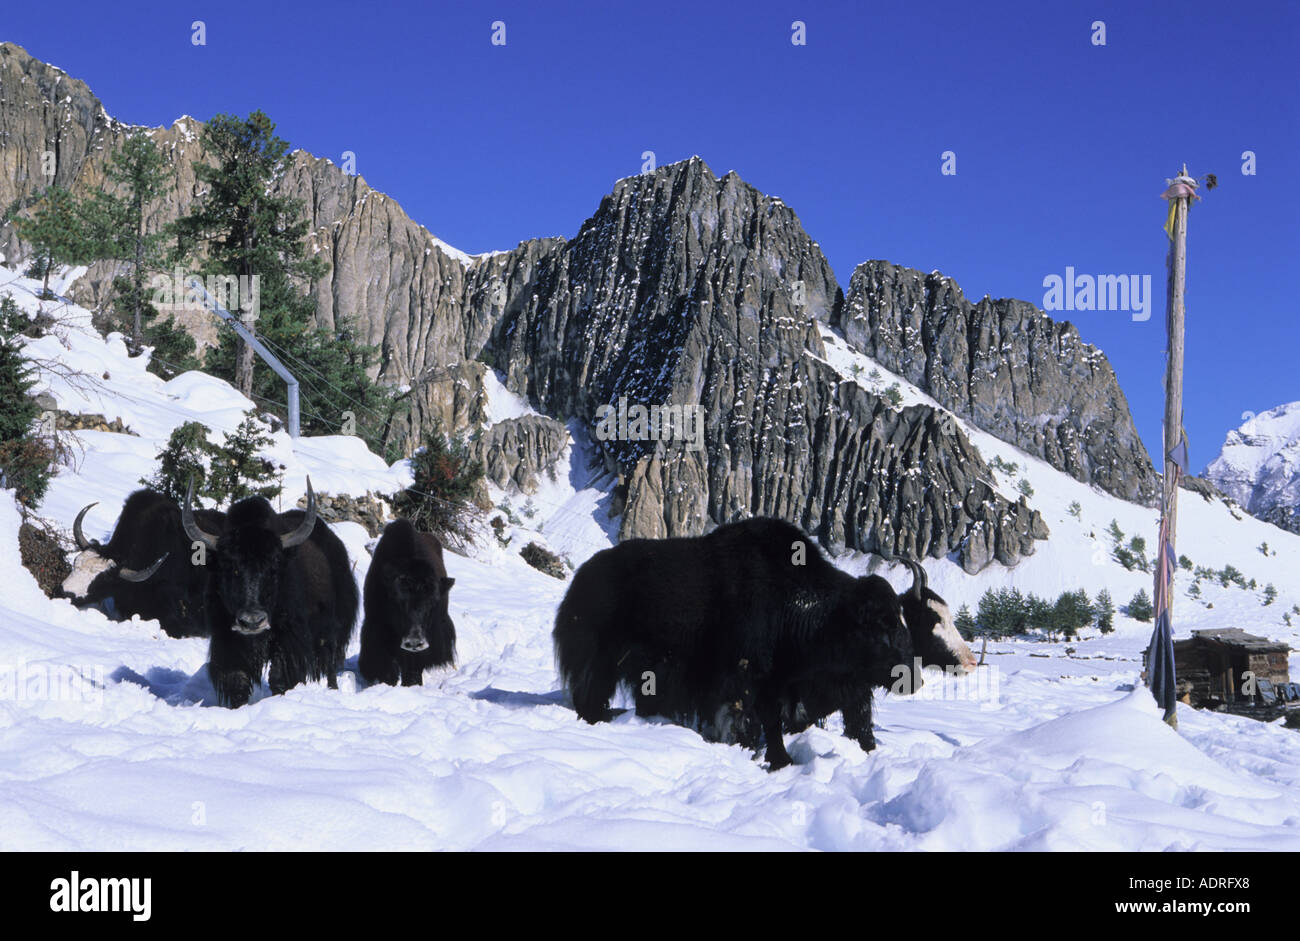 Yaks Bos mufus grunniens wad deep in snow Braga surroundings in Annapurna Conservation Area Nepal Stock Photo